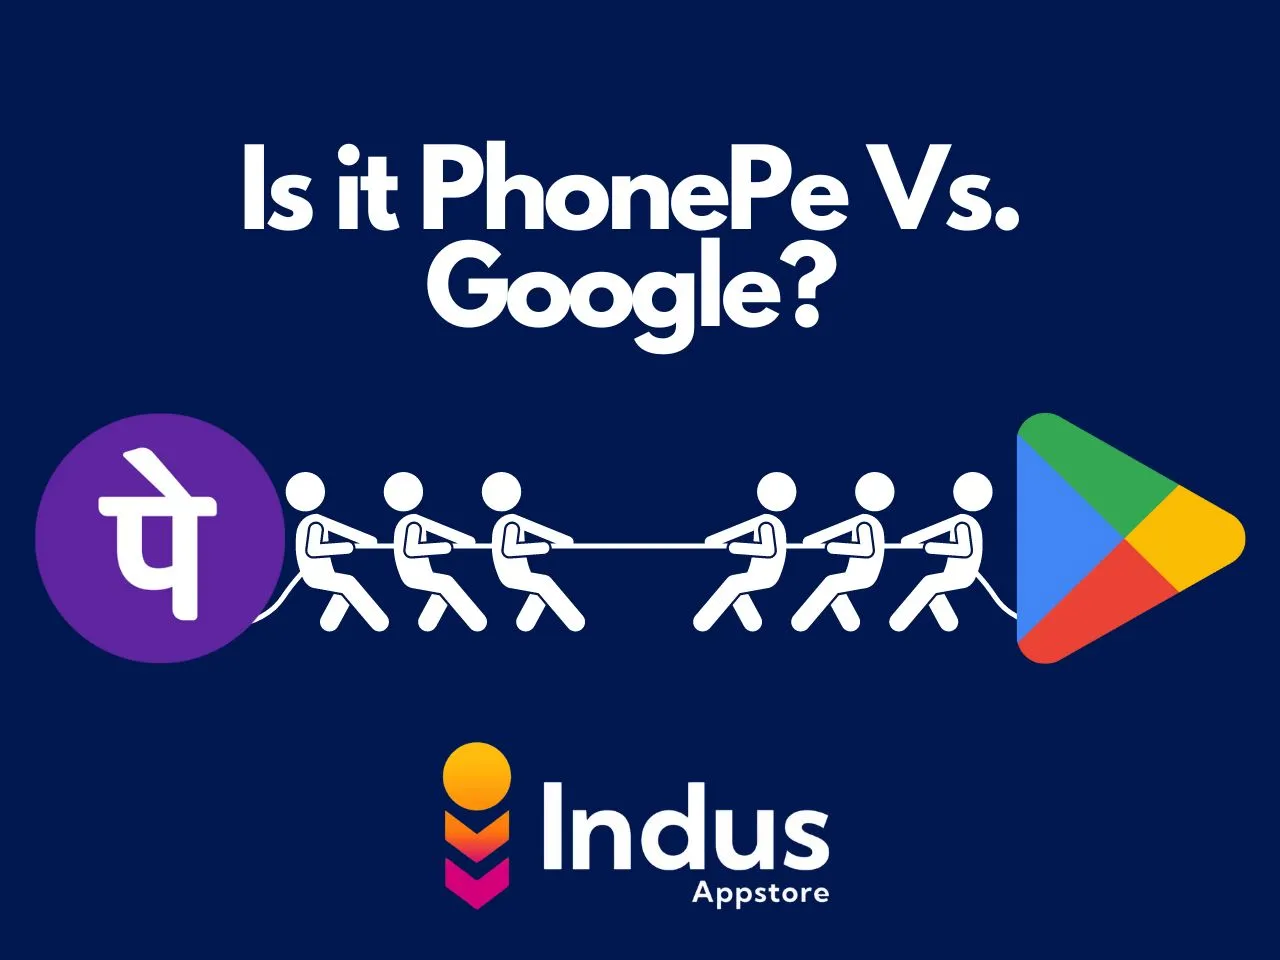 PhonePe Indus App Store Challenges Google 100000 Downloads in Just 3 Days